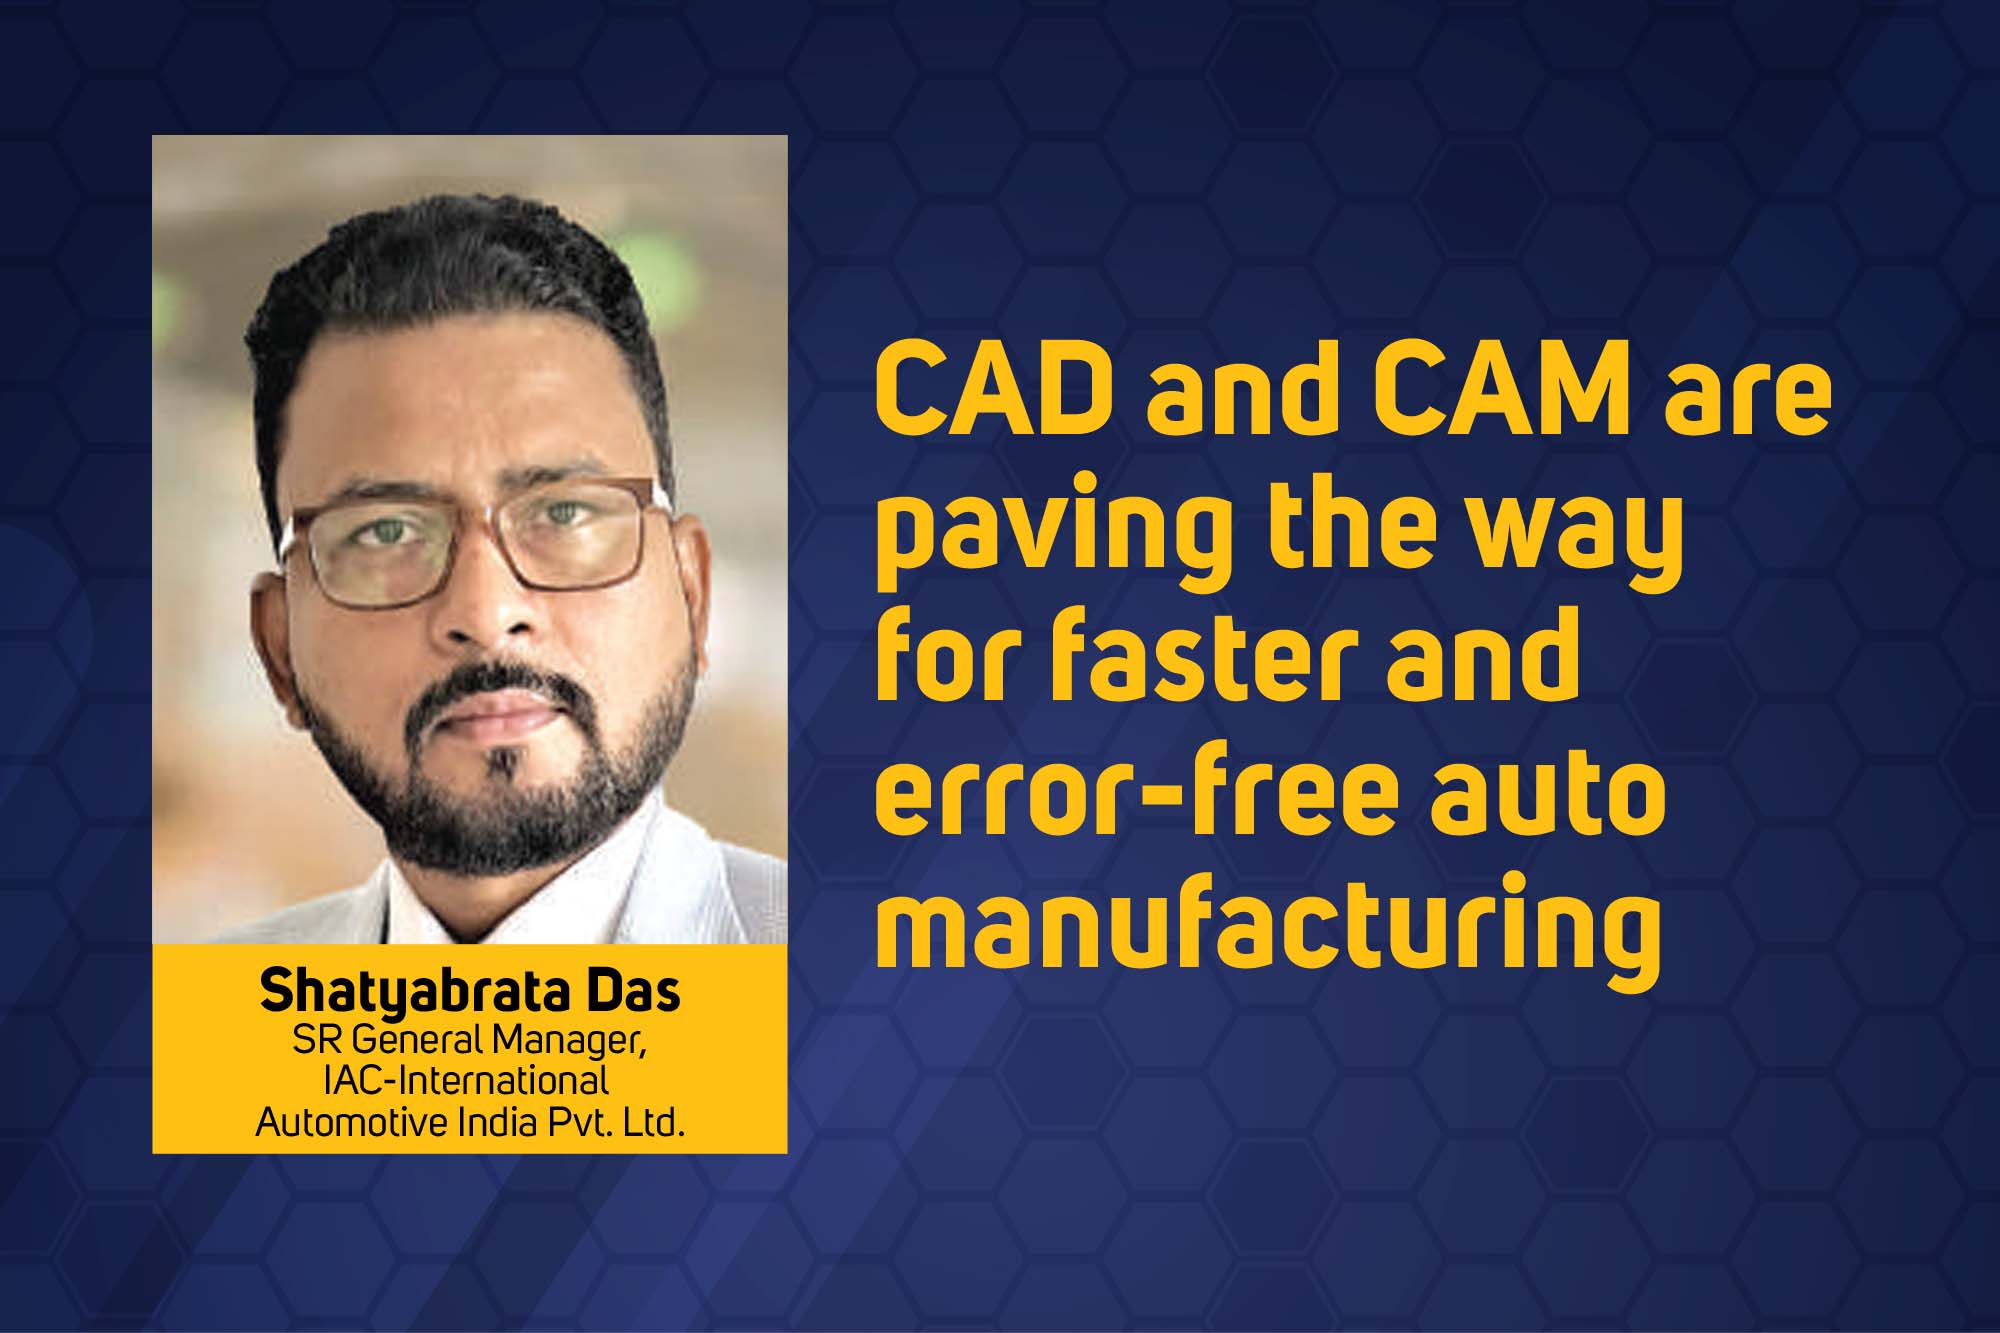 CAD and CAM are paving the way for faster and error-free auto manufacturing